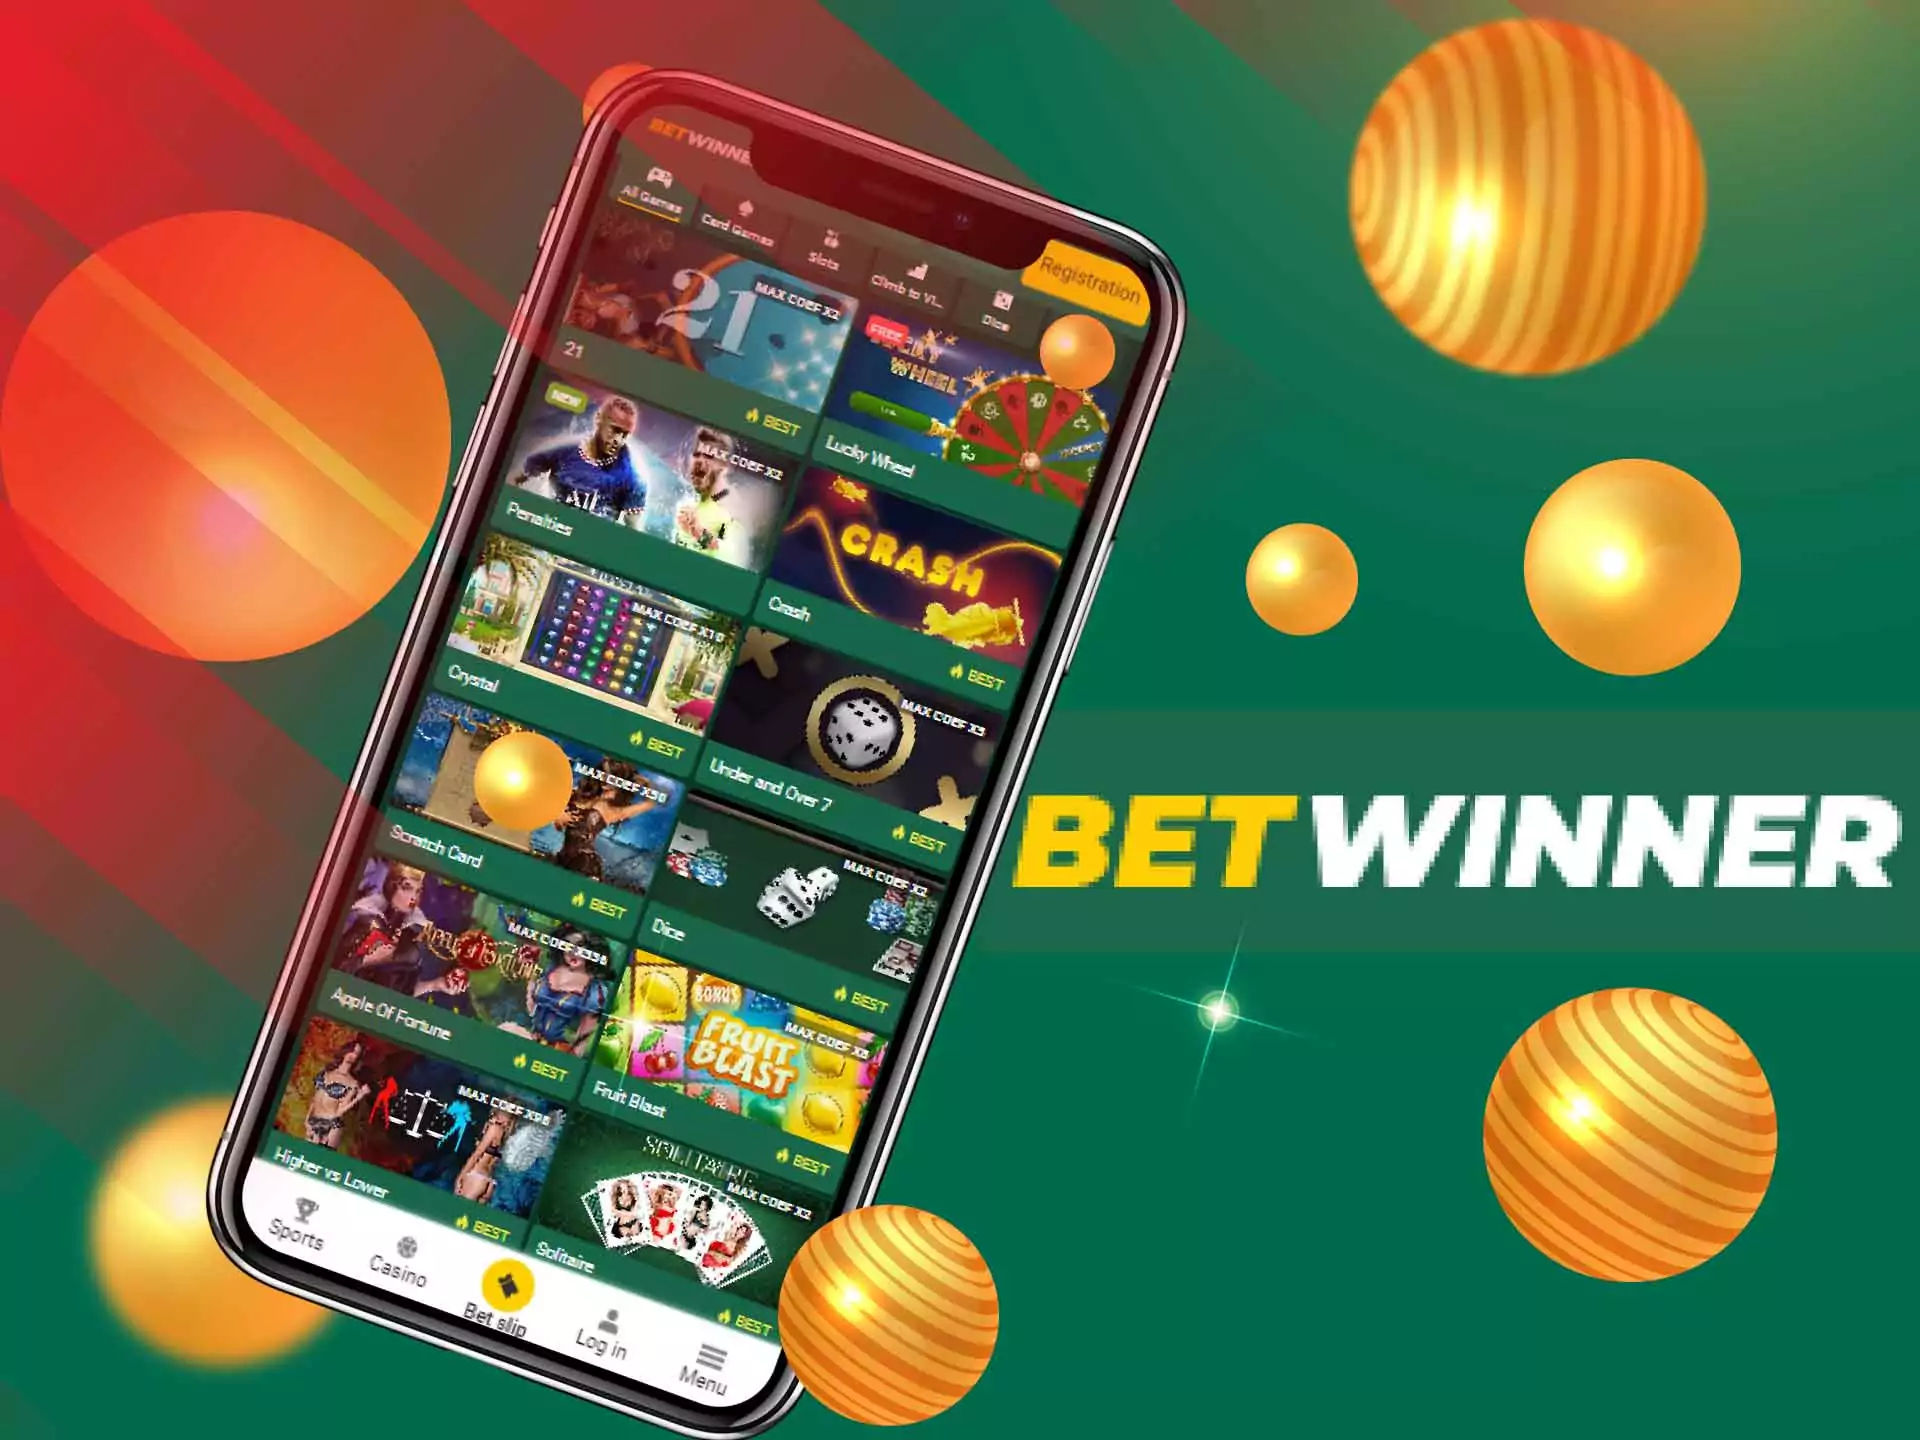 TV games are also available at Betwinner.